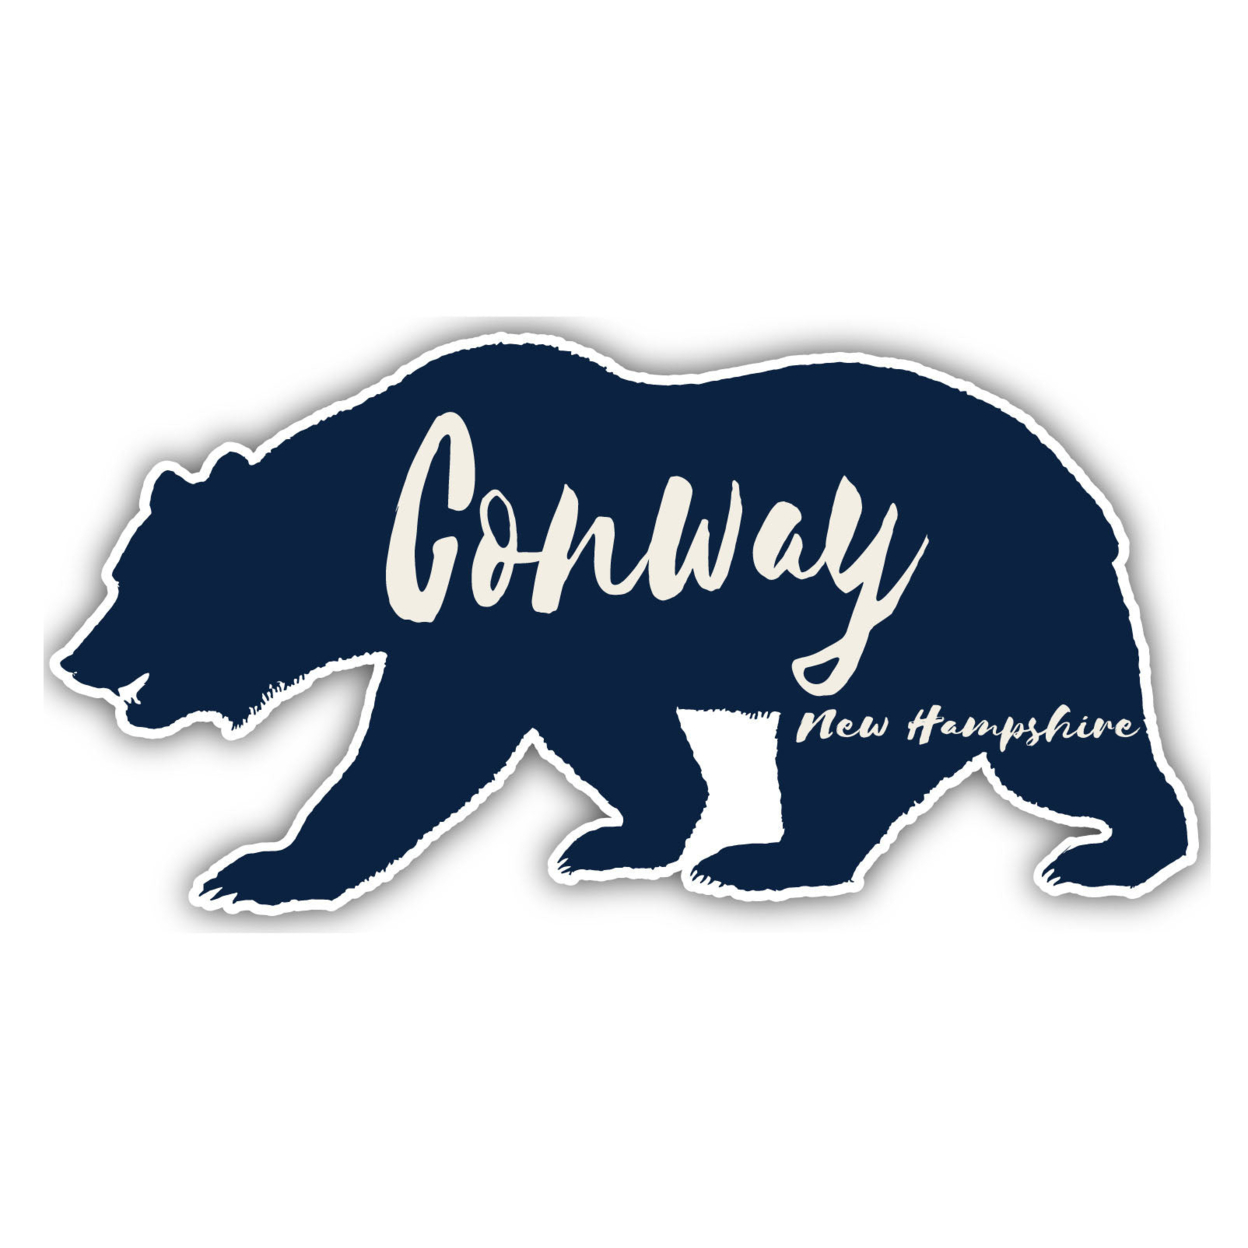 Conway New Hampshire Souvenir Decorative Stickers (Choose Theme And Size) - Single Unit, 10-Inch, Bear